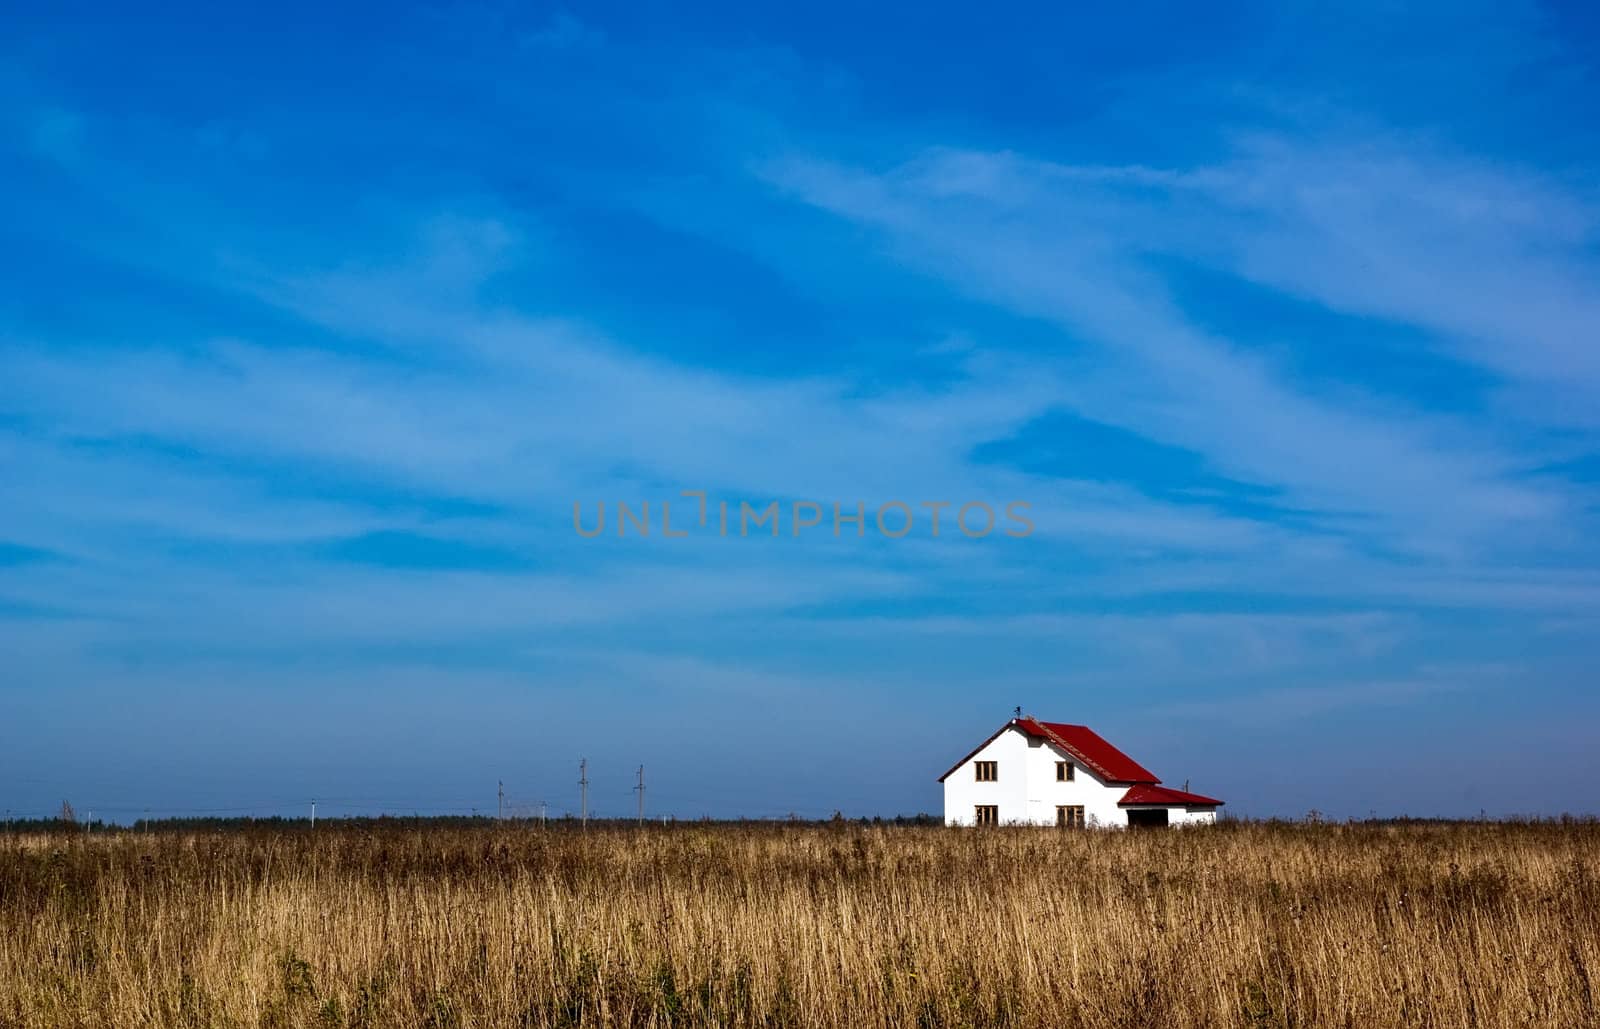 house, field, sky, structure, nature, architecture